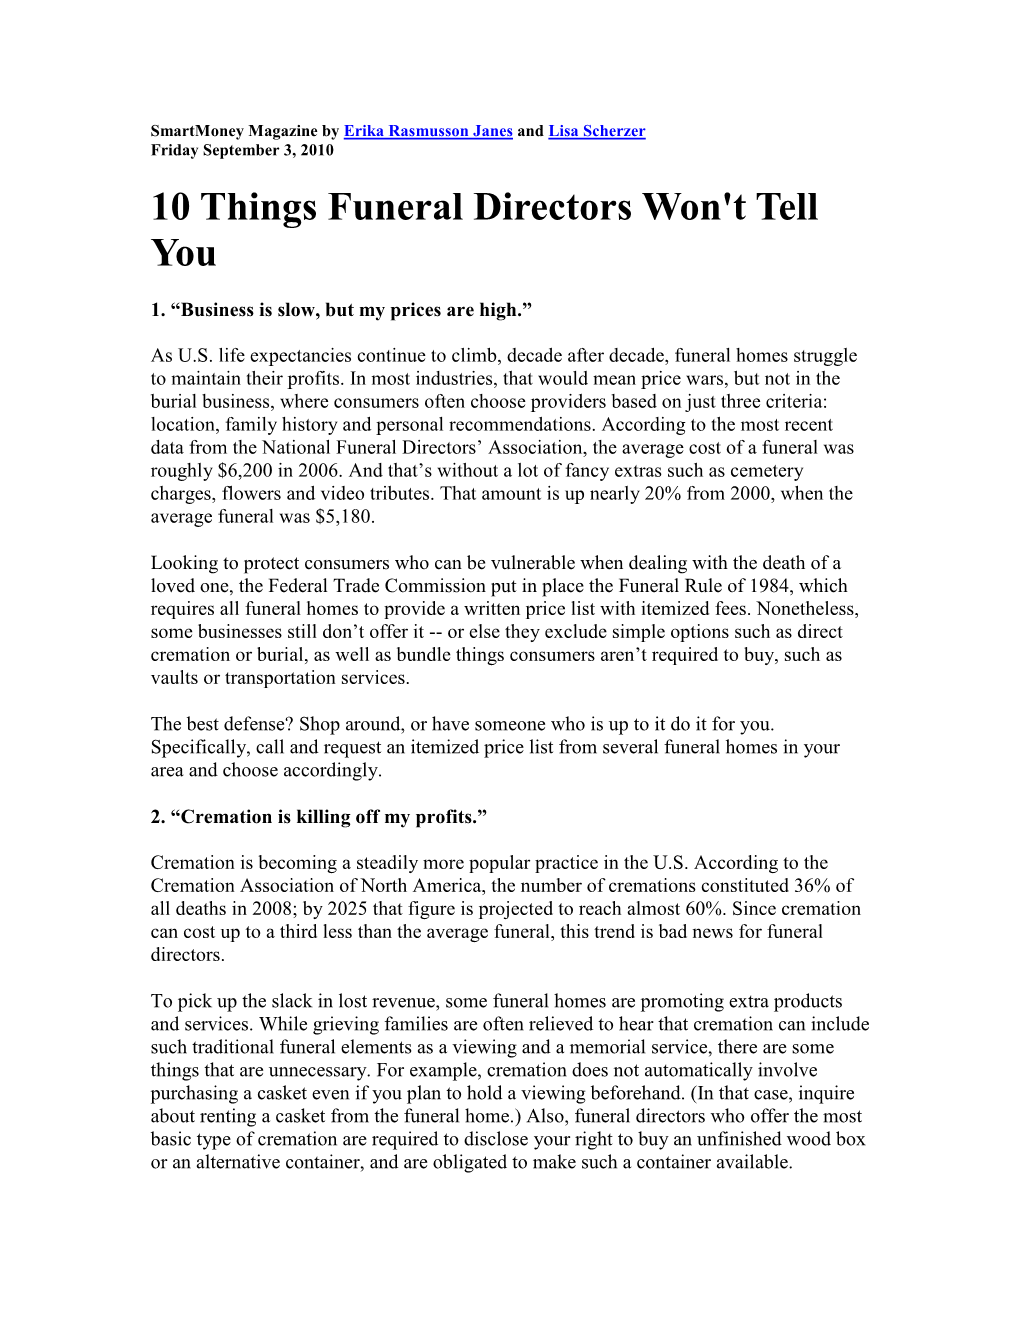 10 Things Your Funeral Director Won't Tell